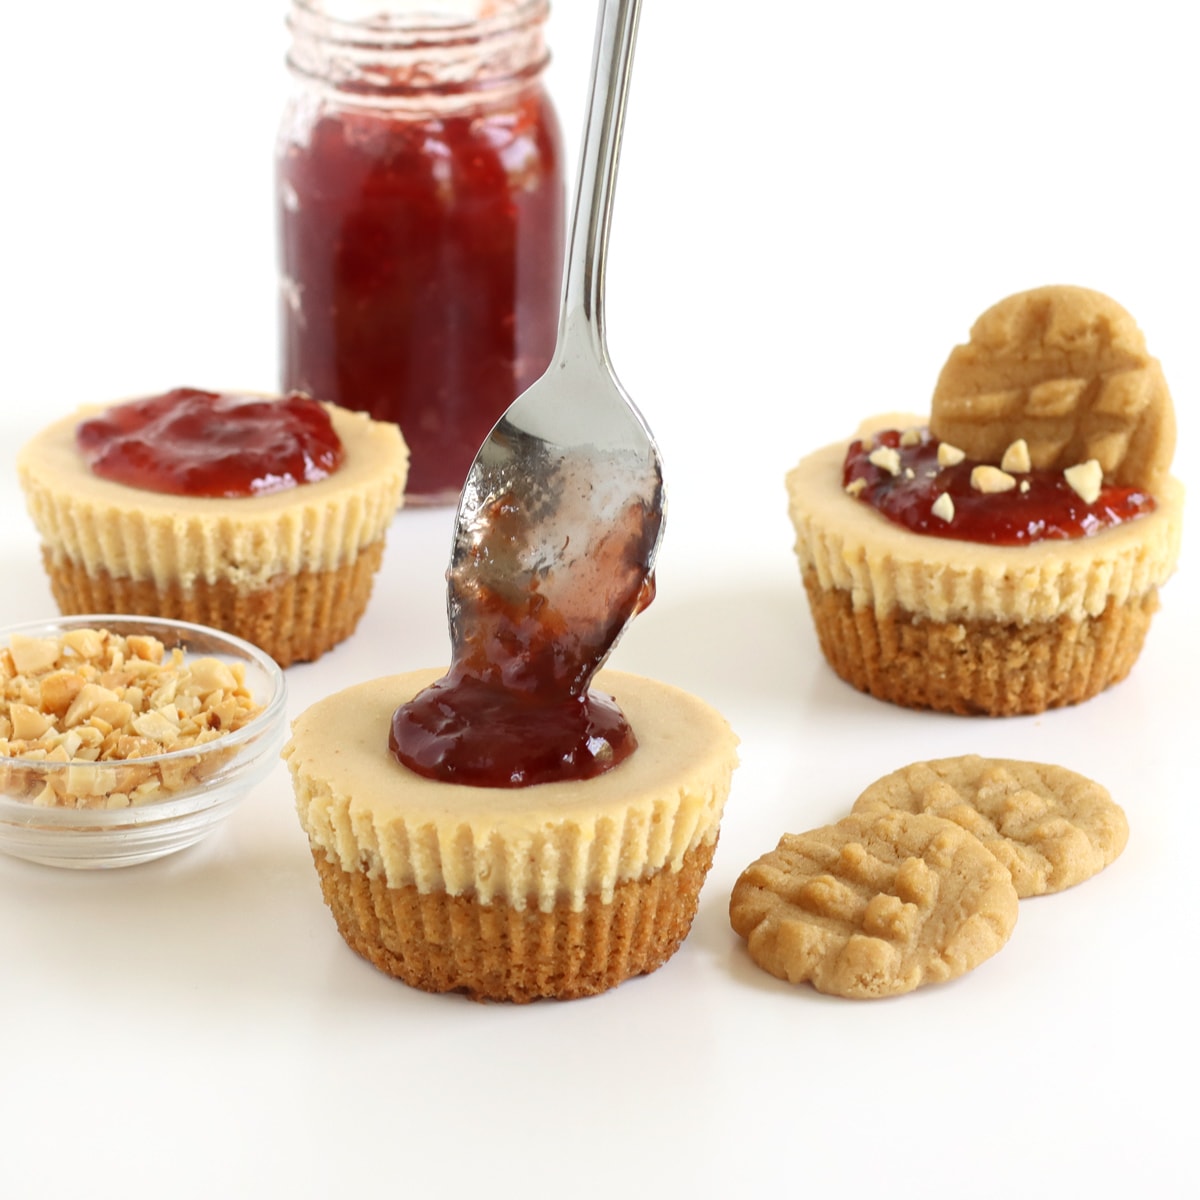 Pouring jelly over a minipeanut butter cheesecake that is next to peanut butter cookies, and pb&j cheesecakes.